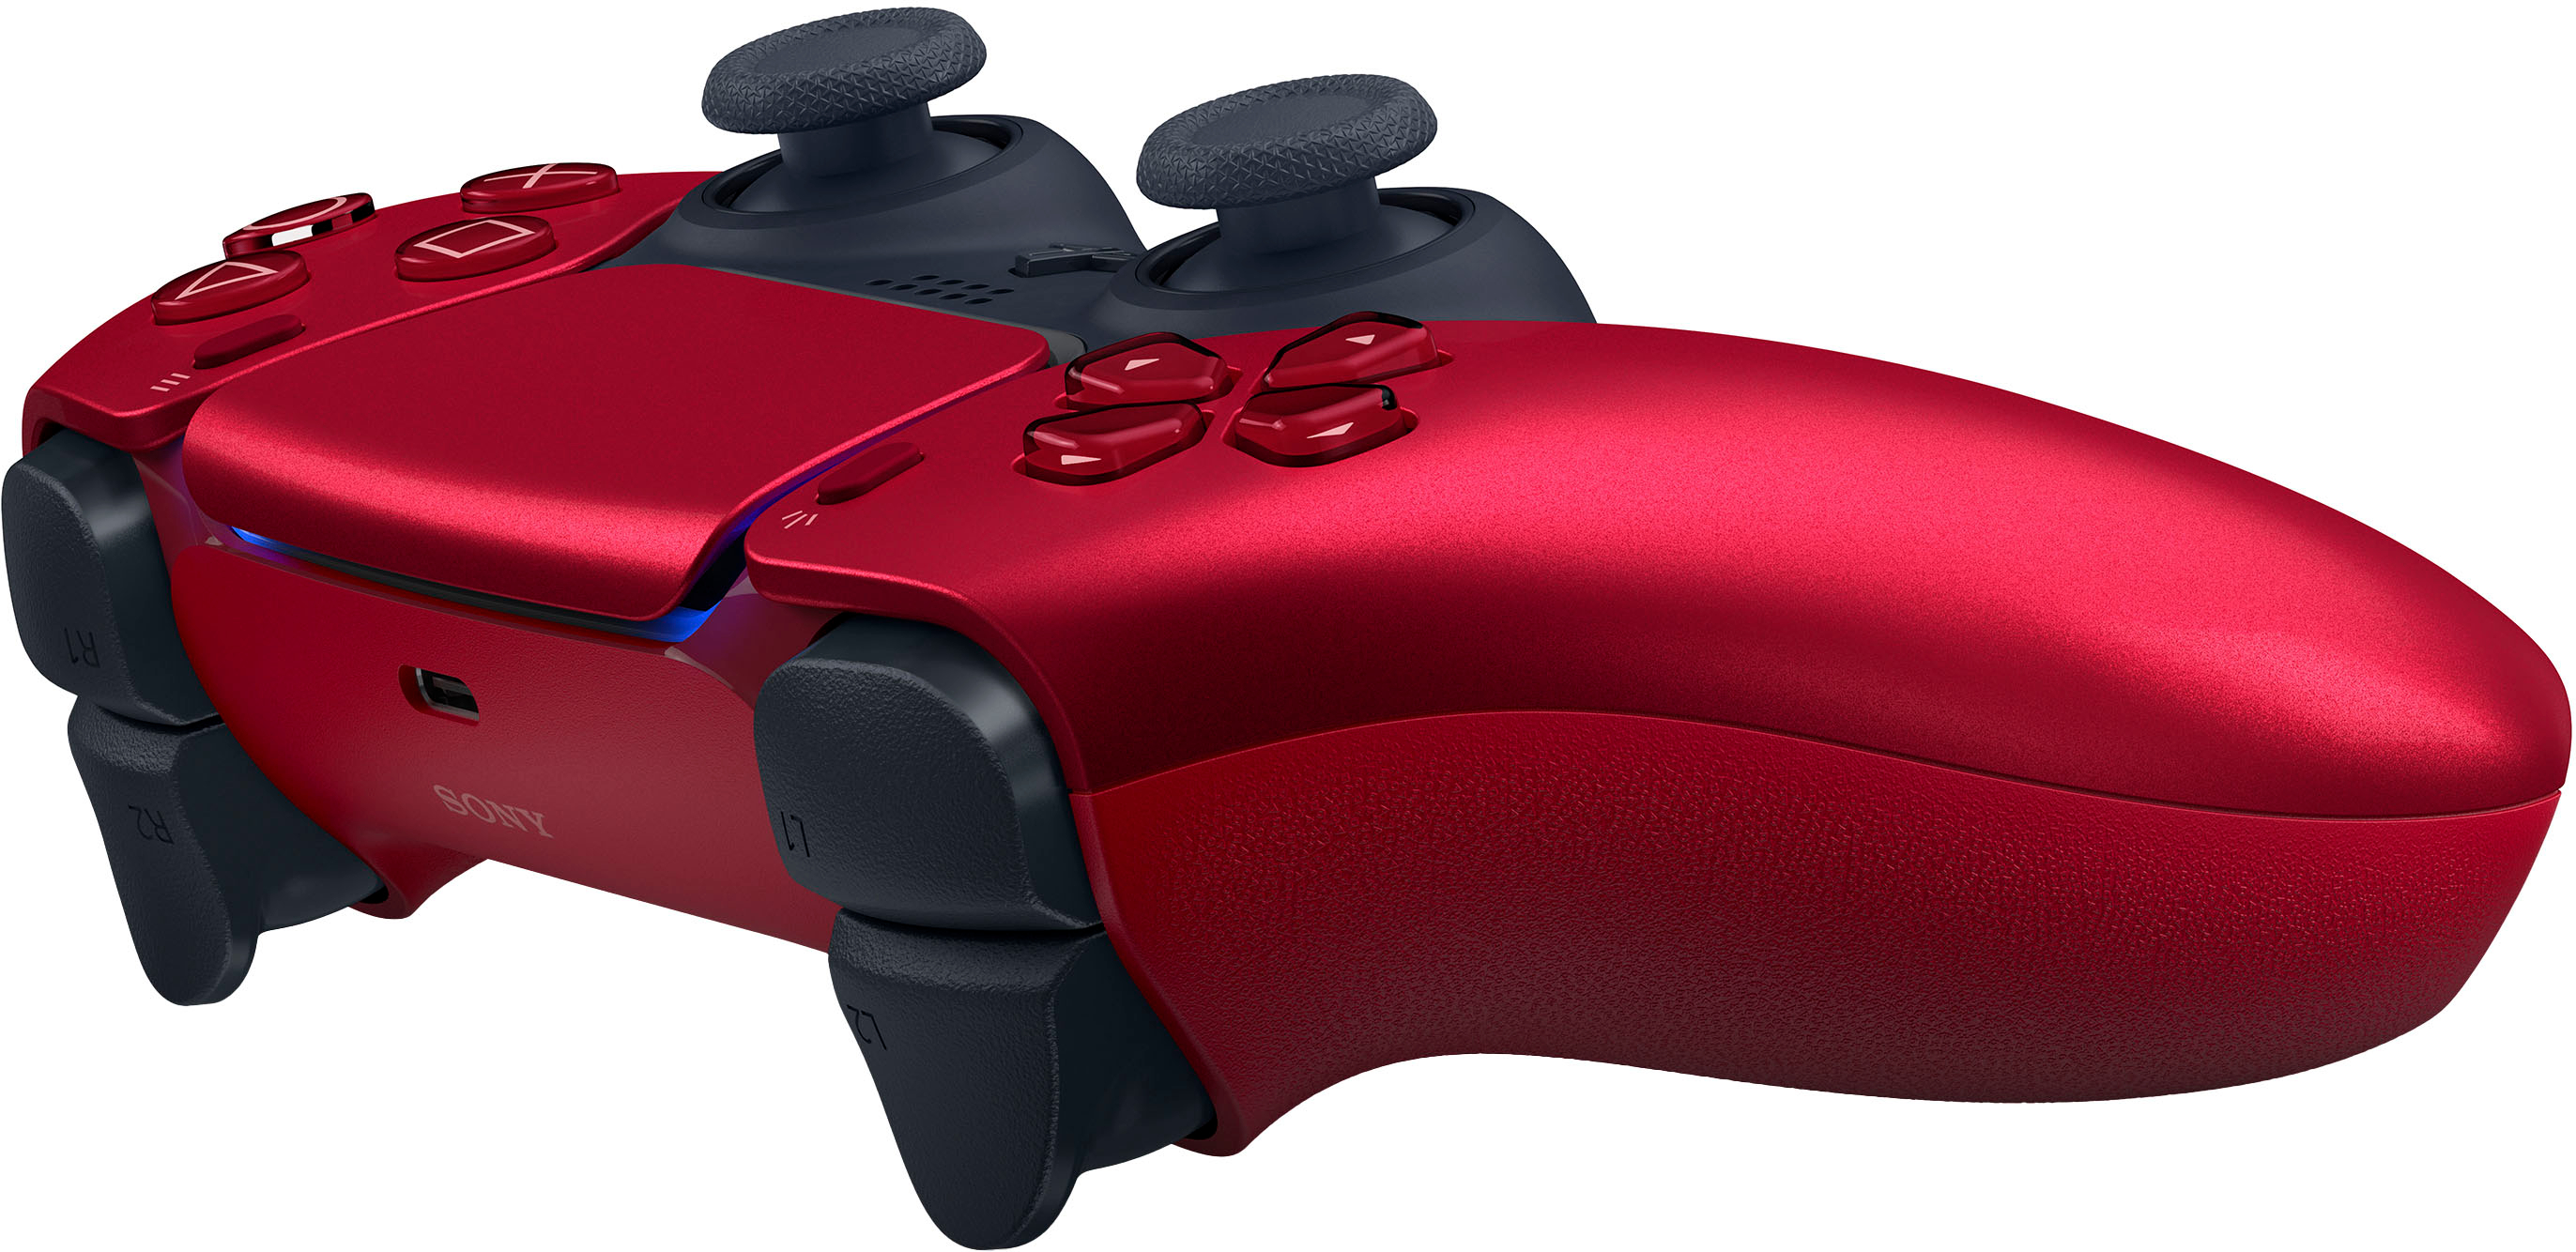 Left View: Sony - PlayStation 5 - DualSense Wireless Controller - Volcanic Red